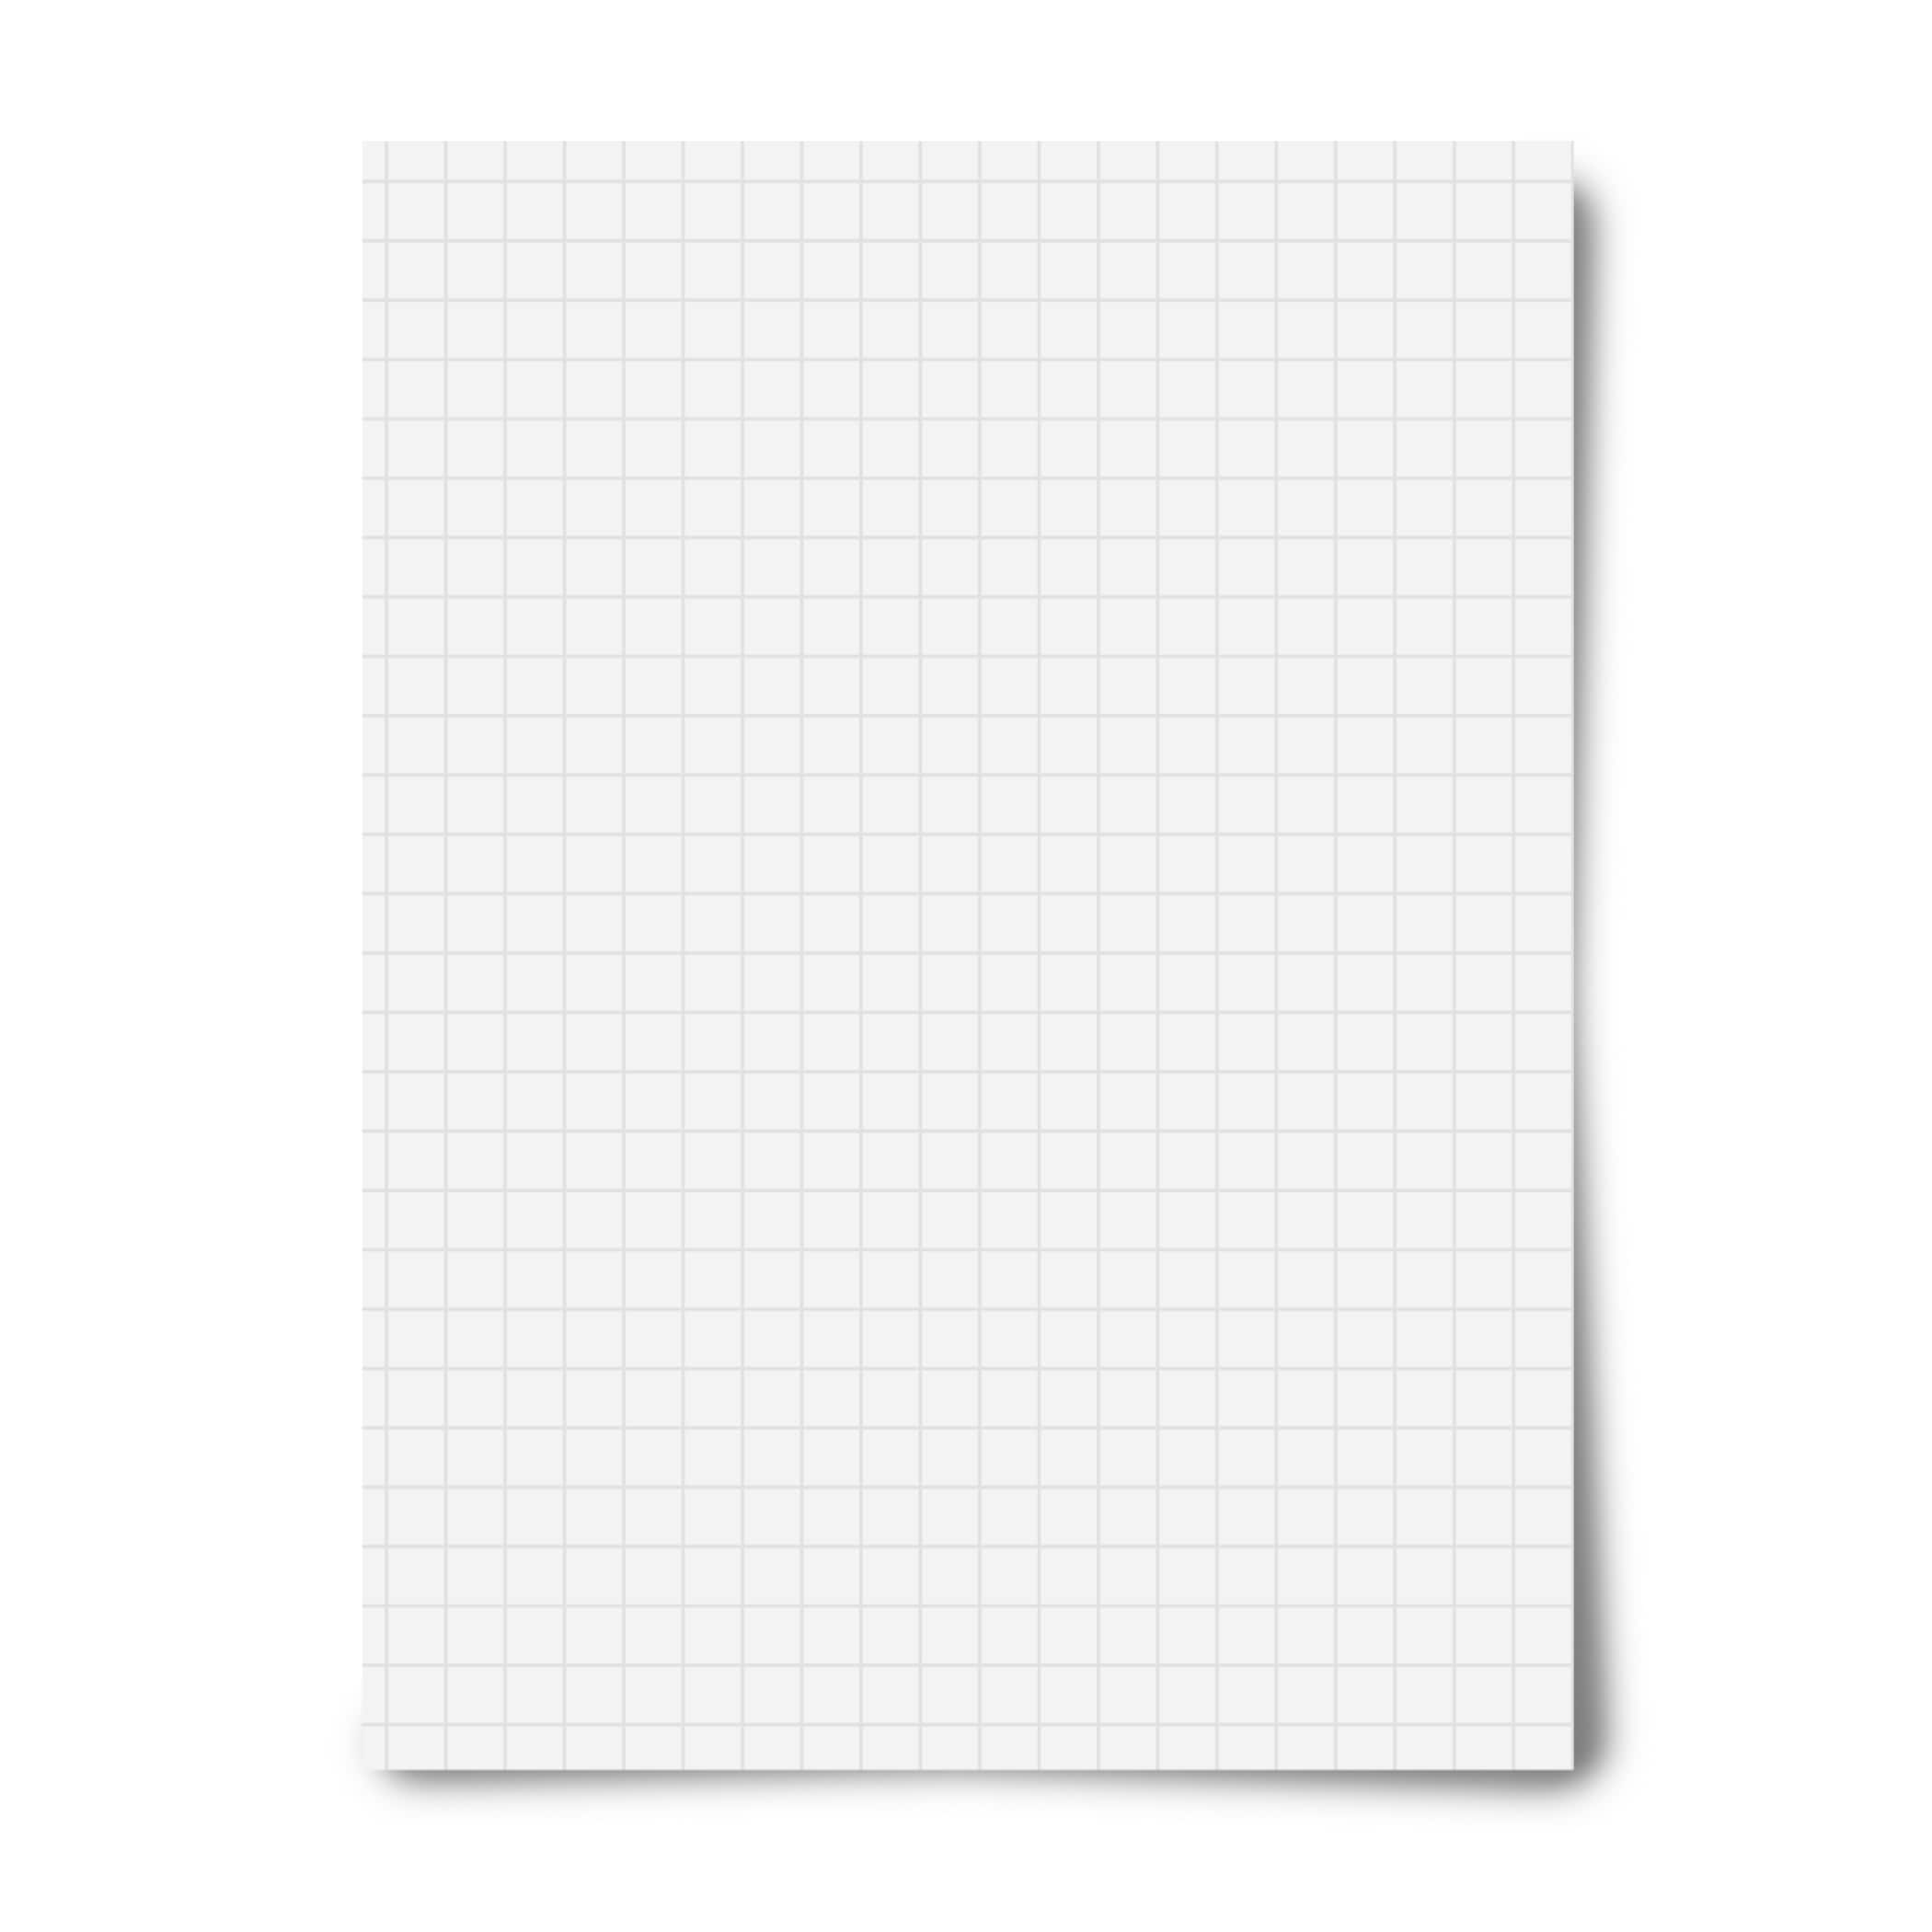 Royal Brites® Poster Board - 5 Pack - White, 11 x 14 in - Ralphs